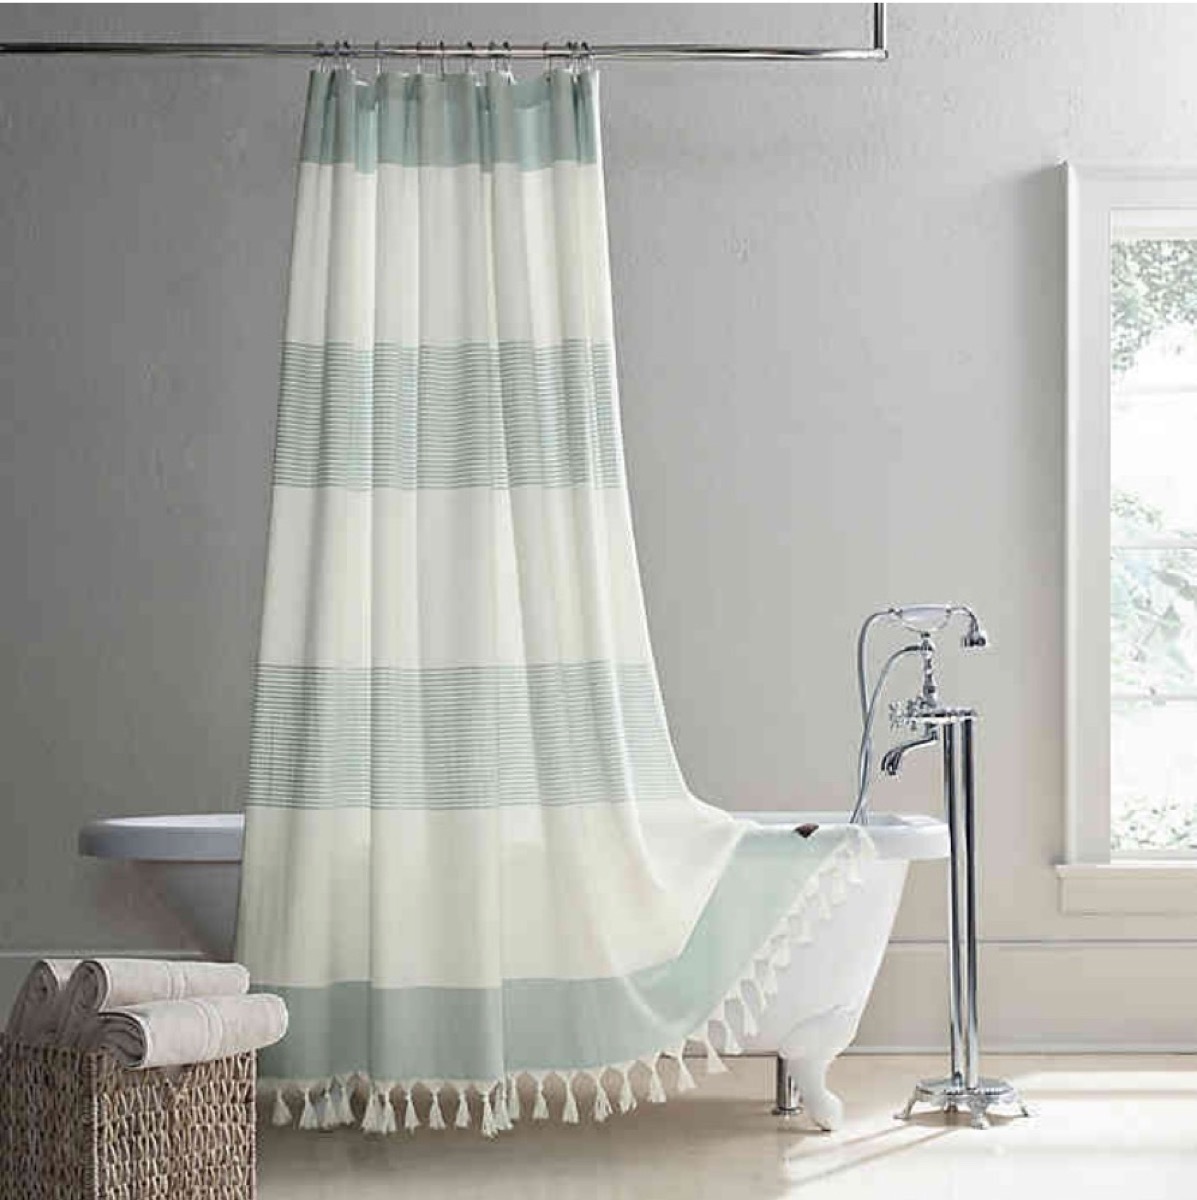 green and white striped shower curtain, bathroom accessories